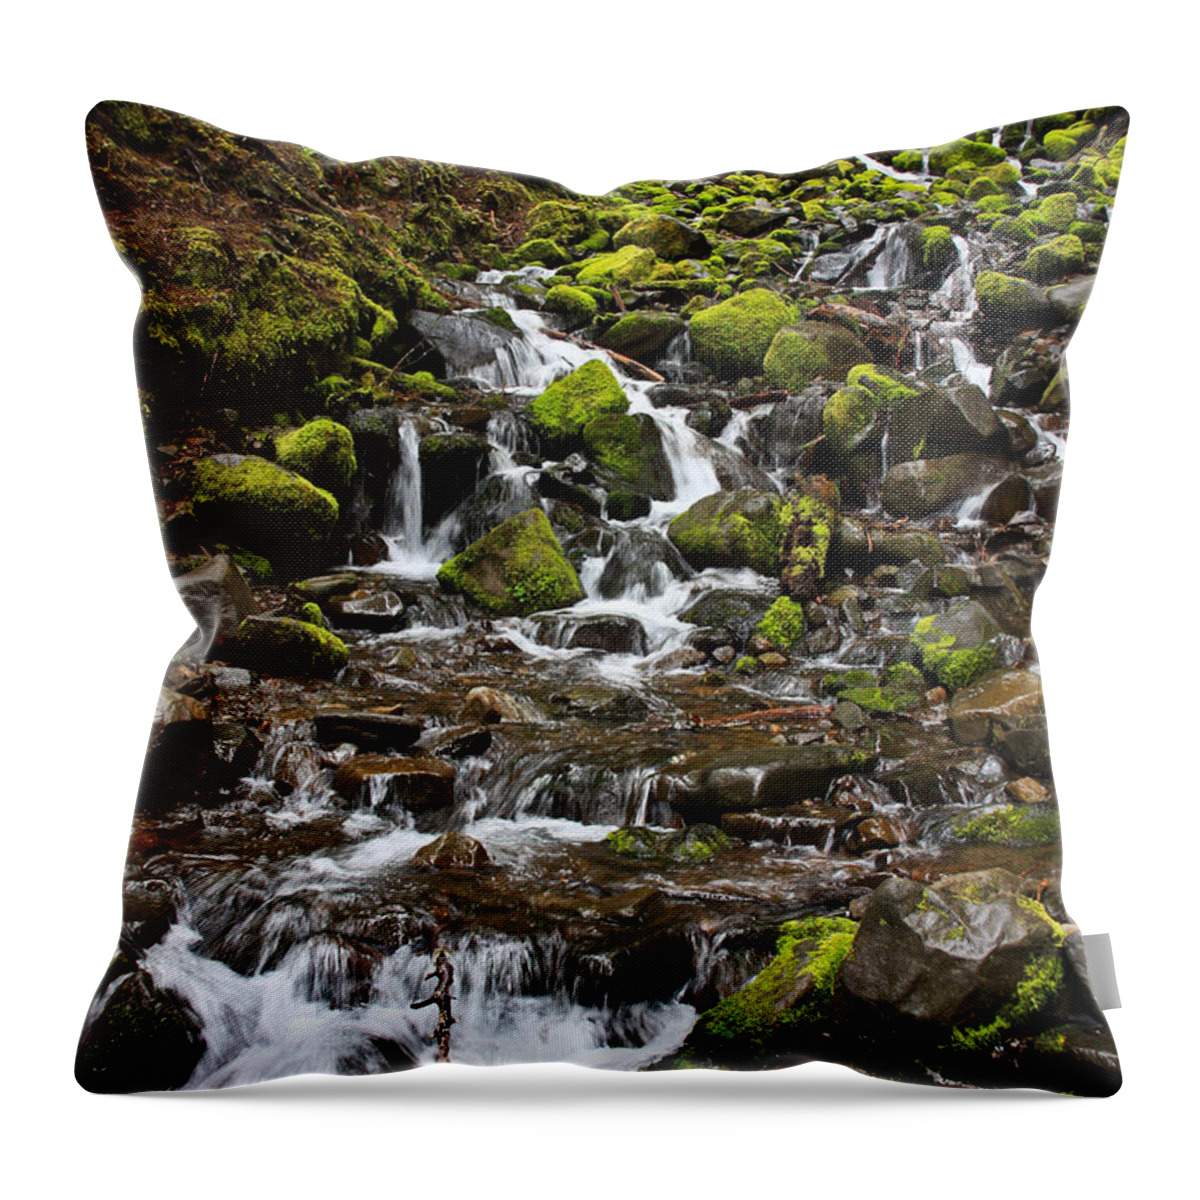 Waterfall Throw Pillow featuring the photograph Small Waterfall by Mark Alder